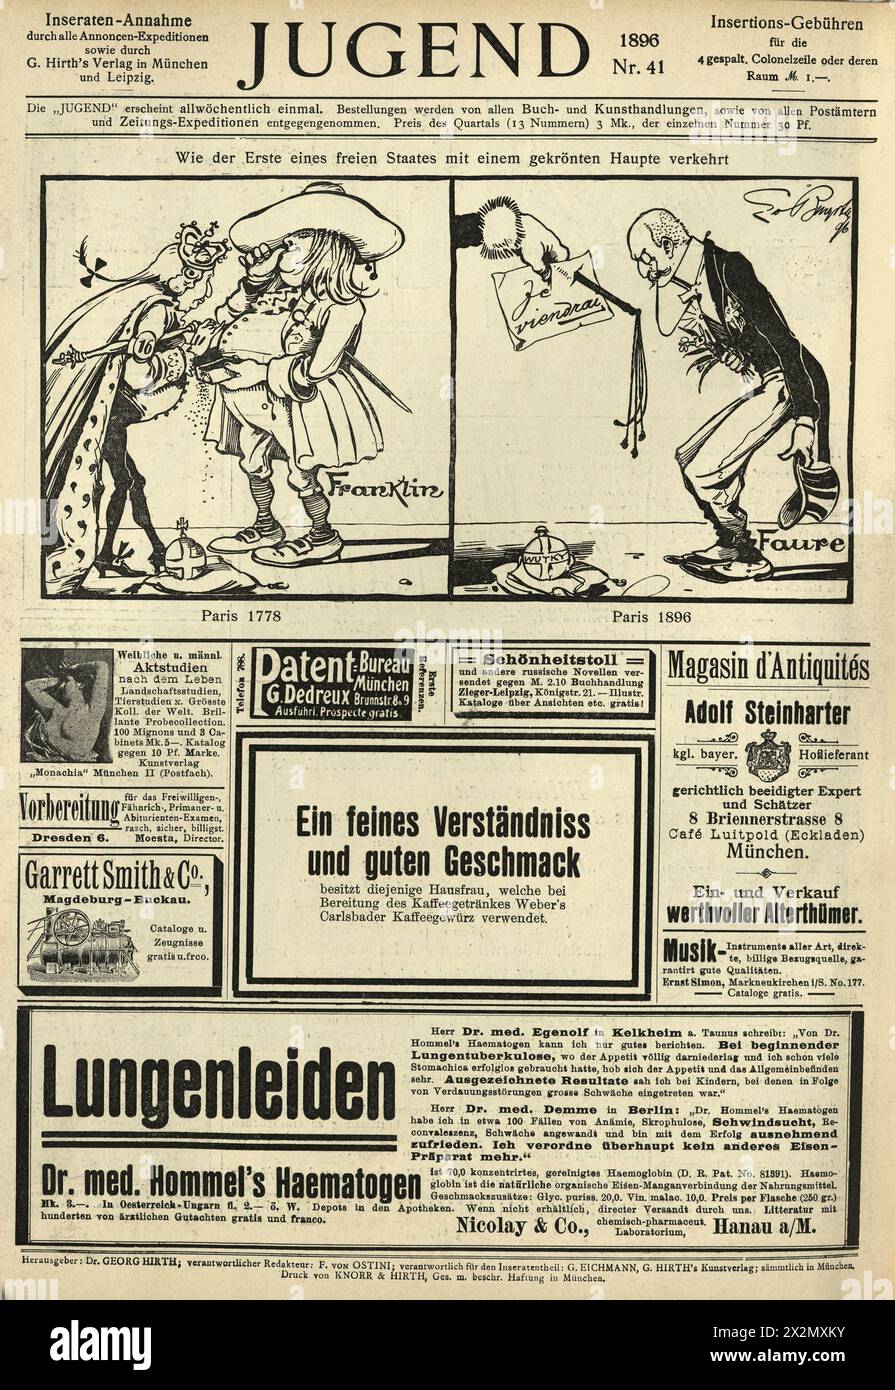 Page from Jugend 1896, Art Nouveau, Jugendstil, cartoon, adverts, German, History 19th Century. Stock Photo